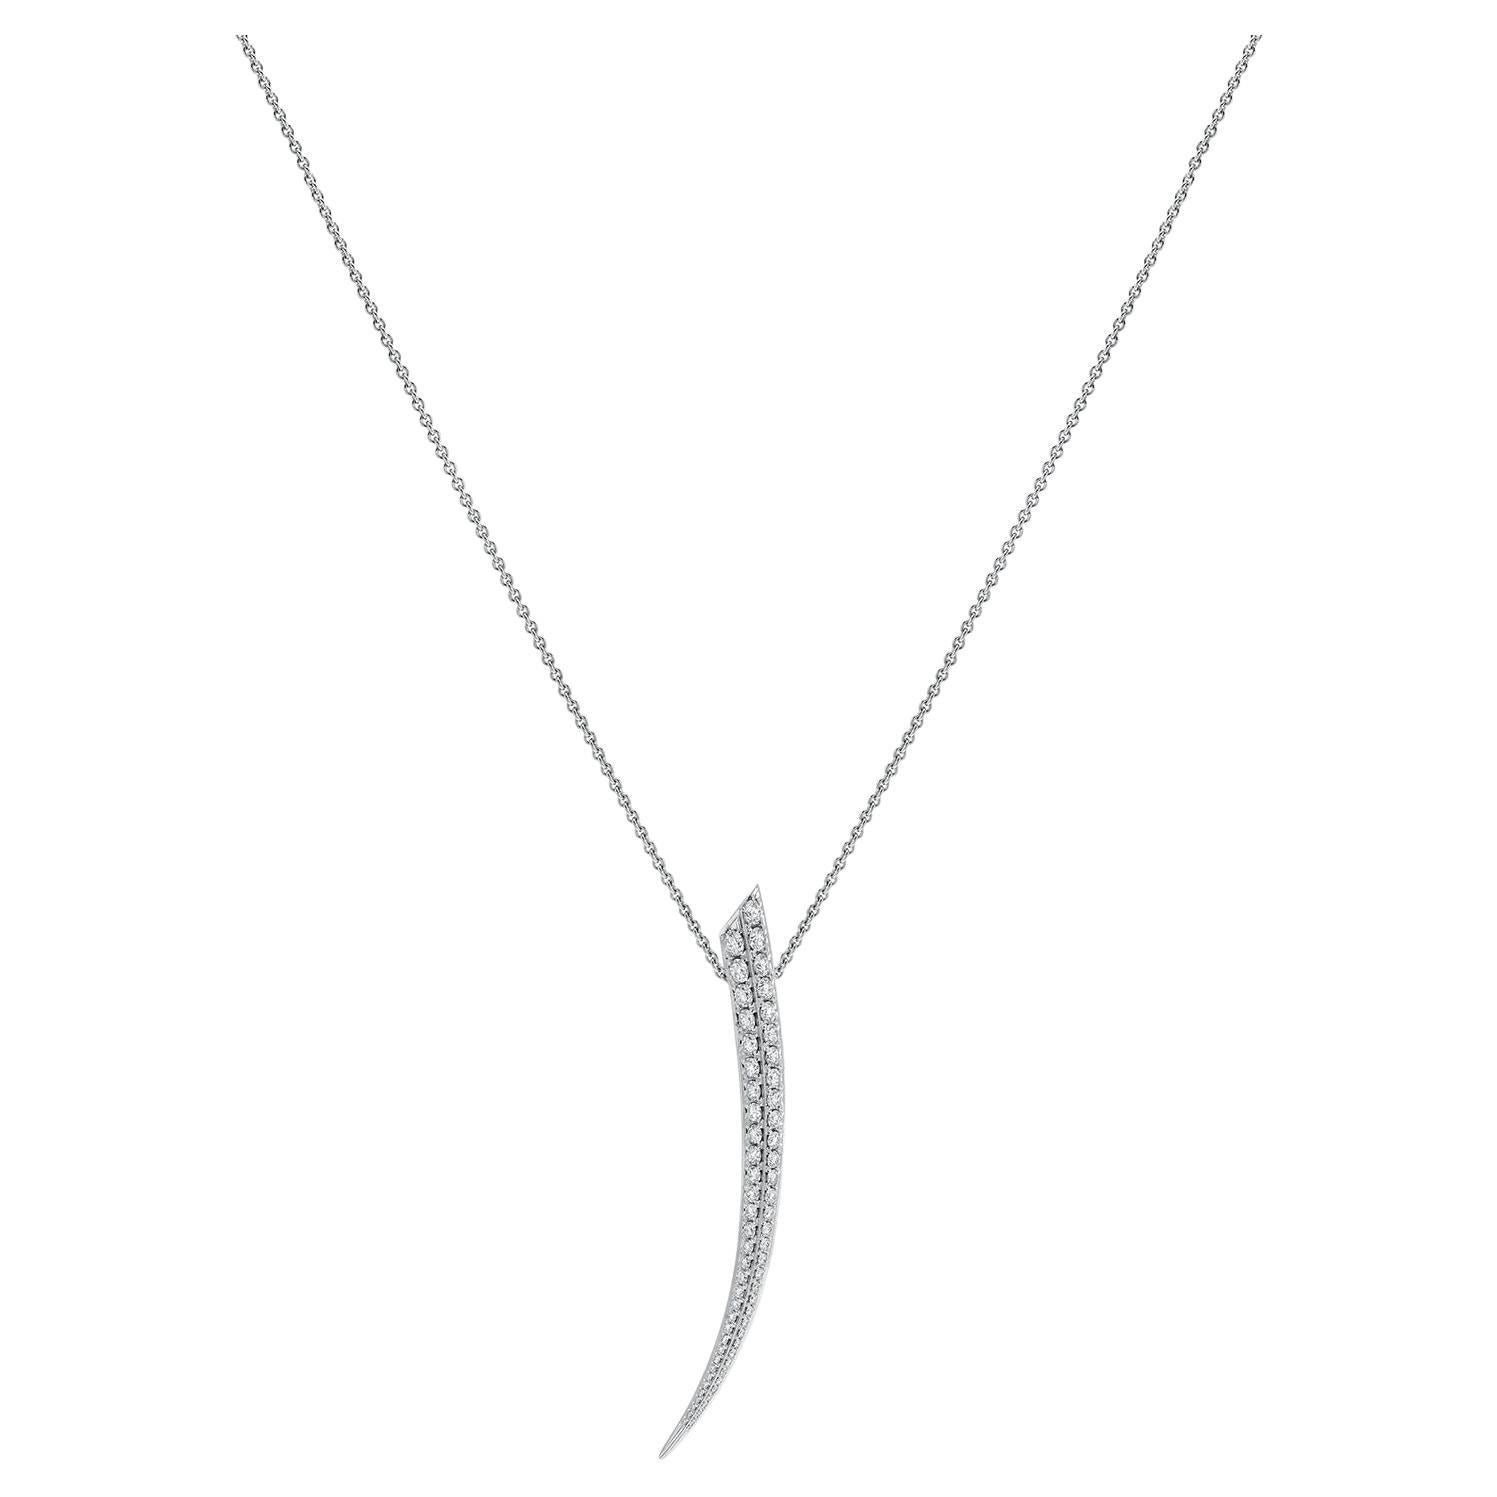 Sabre Fine Large Necklace - 18 Carat White Gold and 2.64 Carat Diamond For Sale